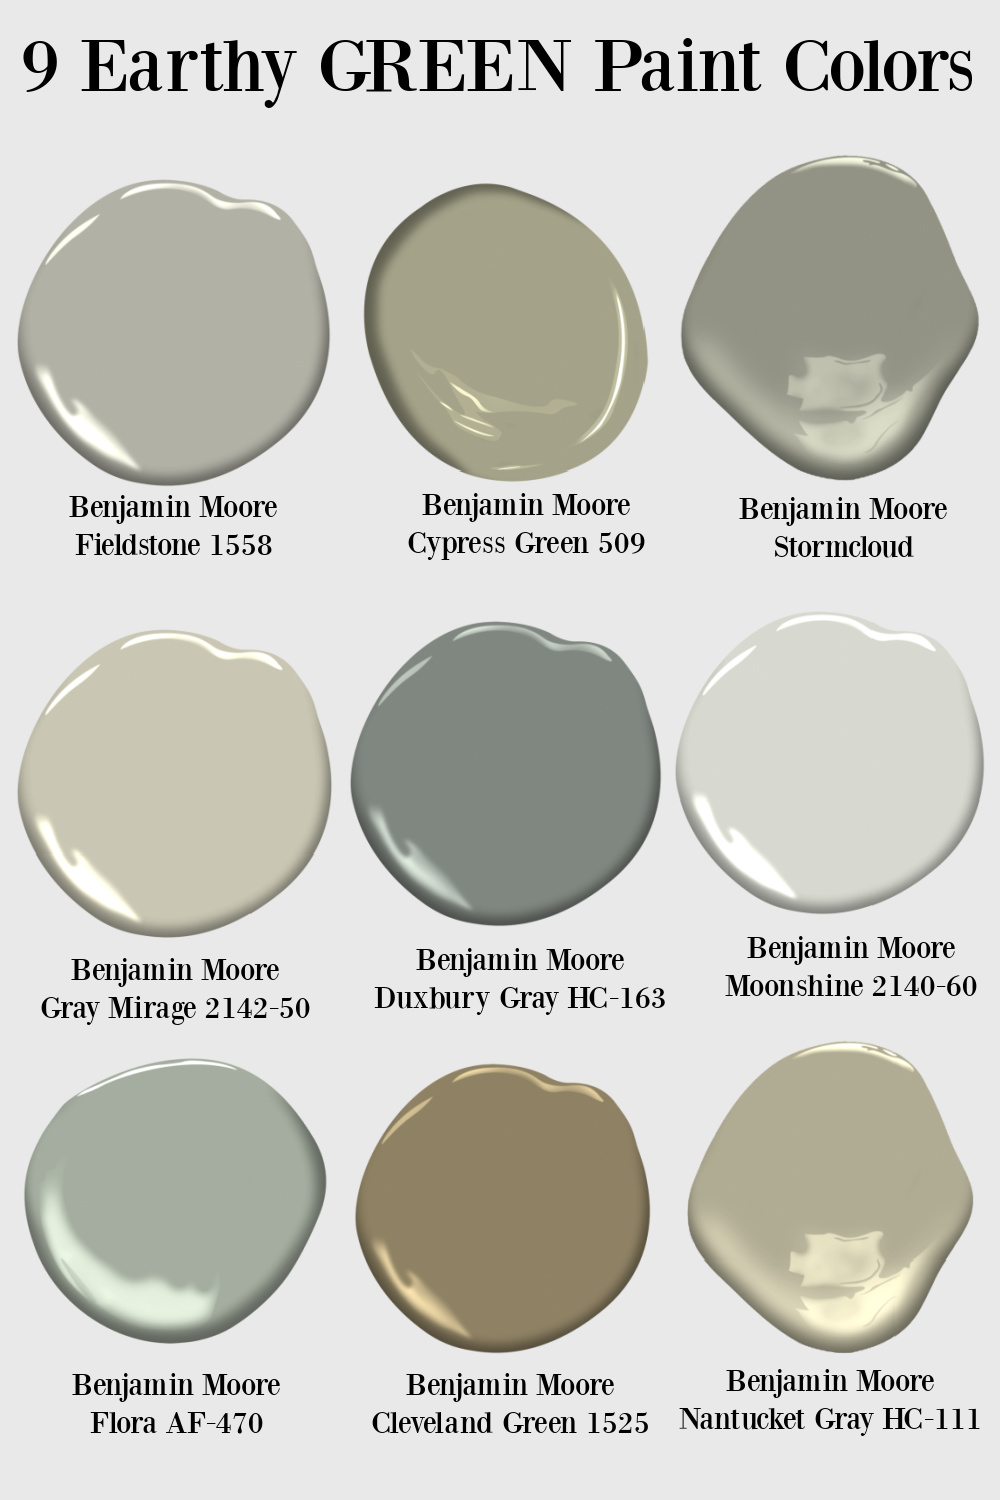 9 earthy green paint colors from Benjamin Moore to consider - Hello Lovely. #greenpaint #paintcolors #earthygreen